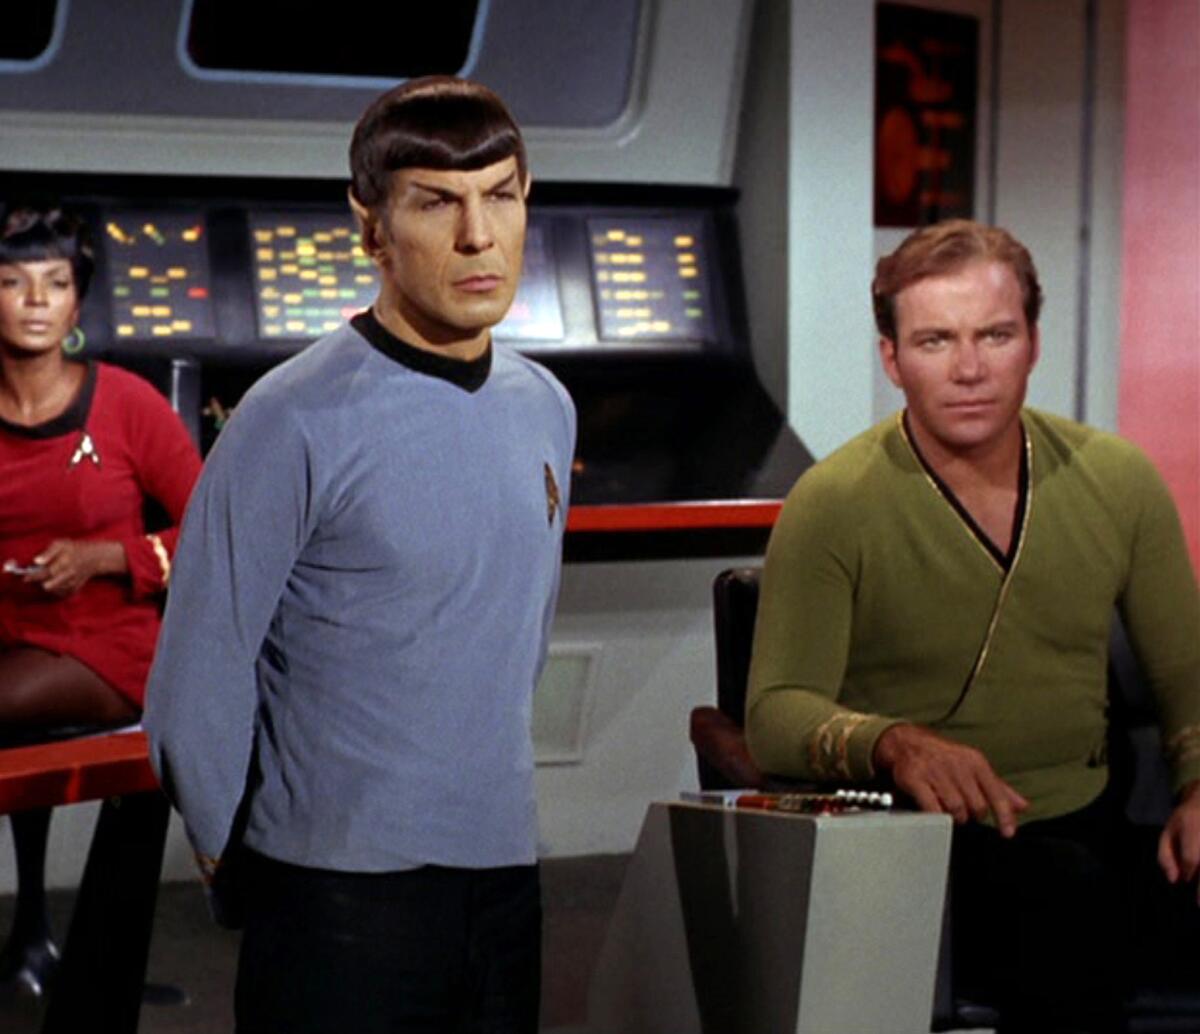 A scene from "Star Trek's" "The Trouble With Tribbles" episode first aired in 1967, featuring, from left, Nichelle Nichols as Uhura, Leonard Nimoy as Mr. Spock and William Shatner as Captain James T. Kirk.